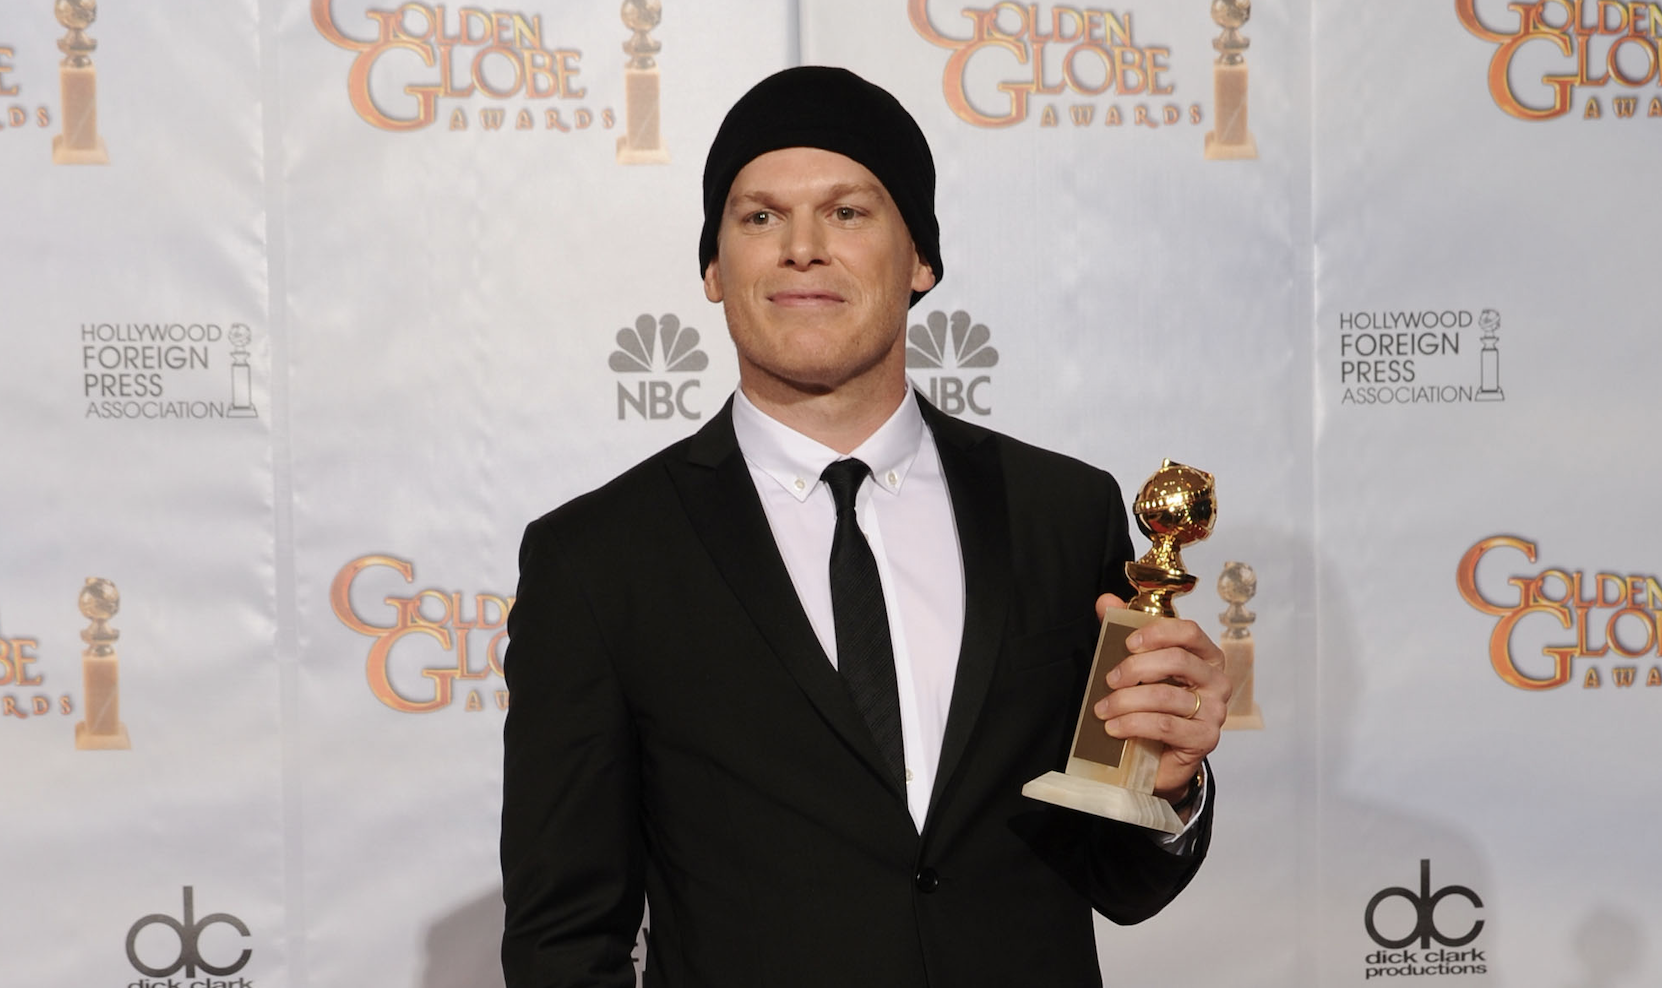 Michael C. Hall won the Golden Globe in 2010 while still undergoing chemotherapy